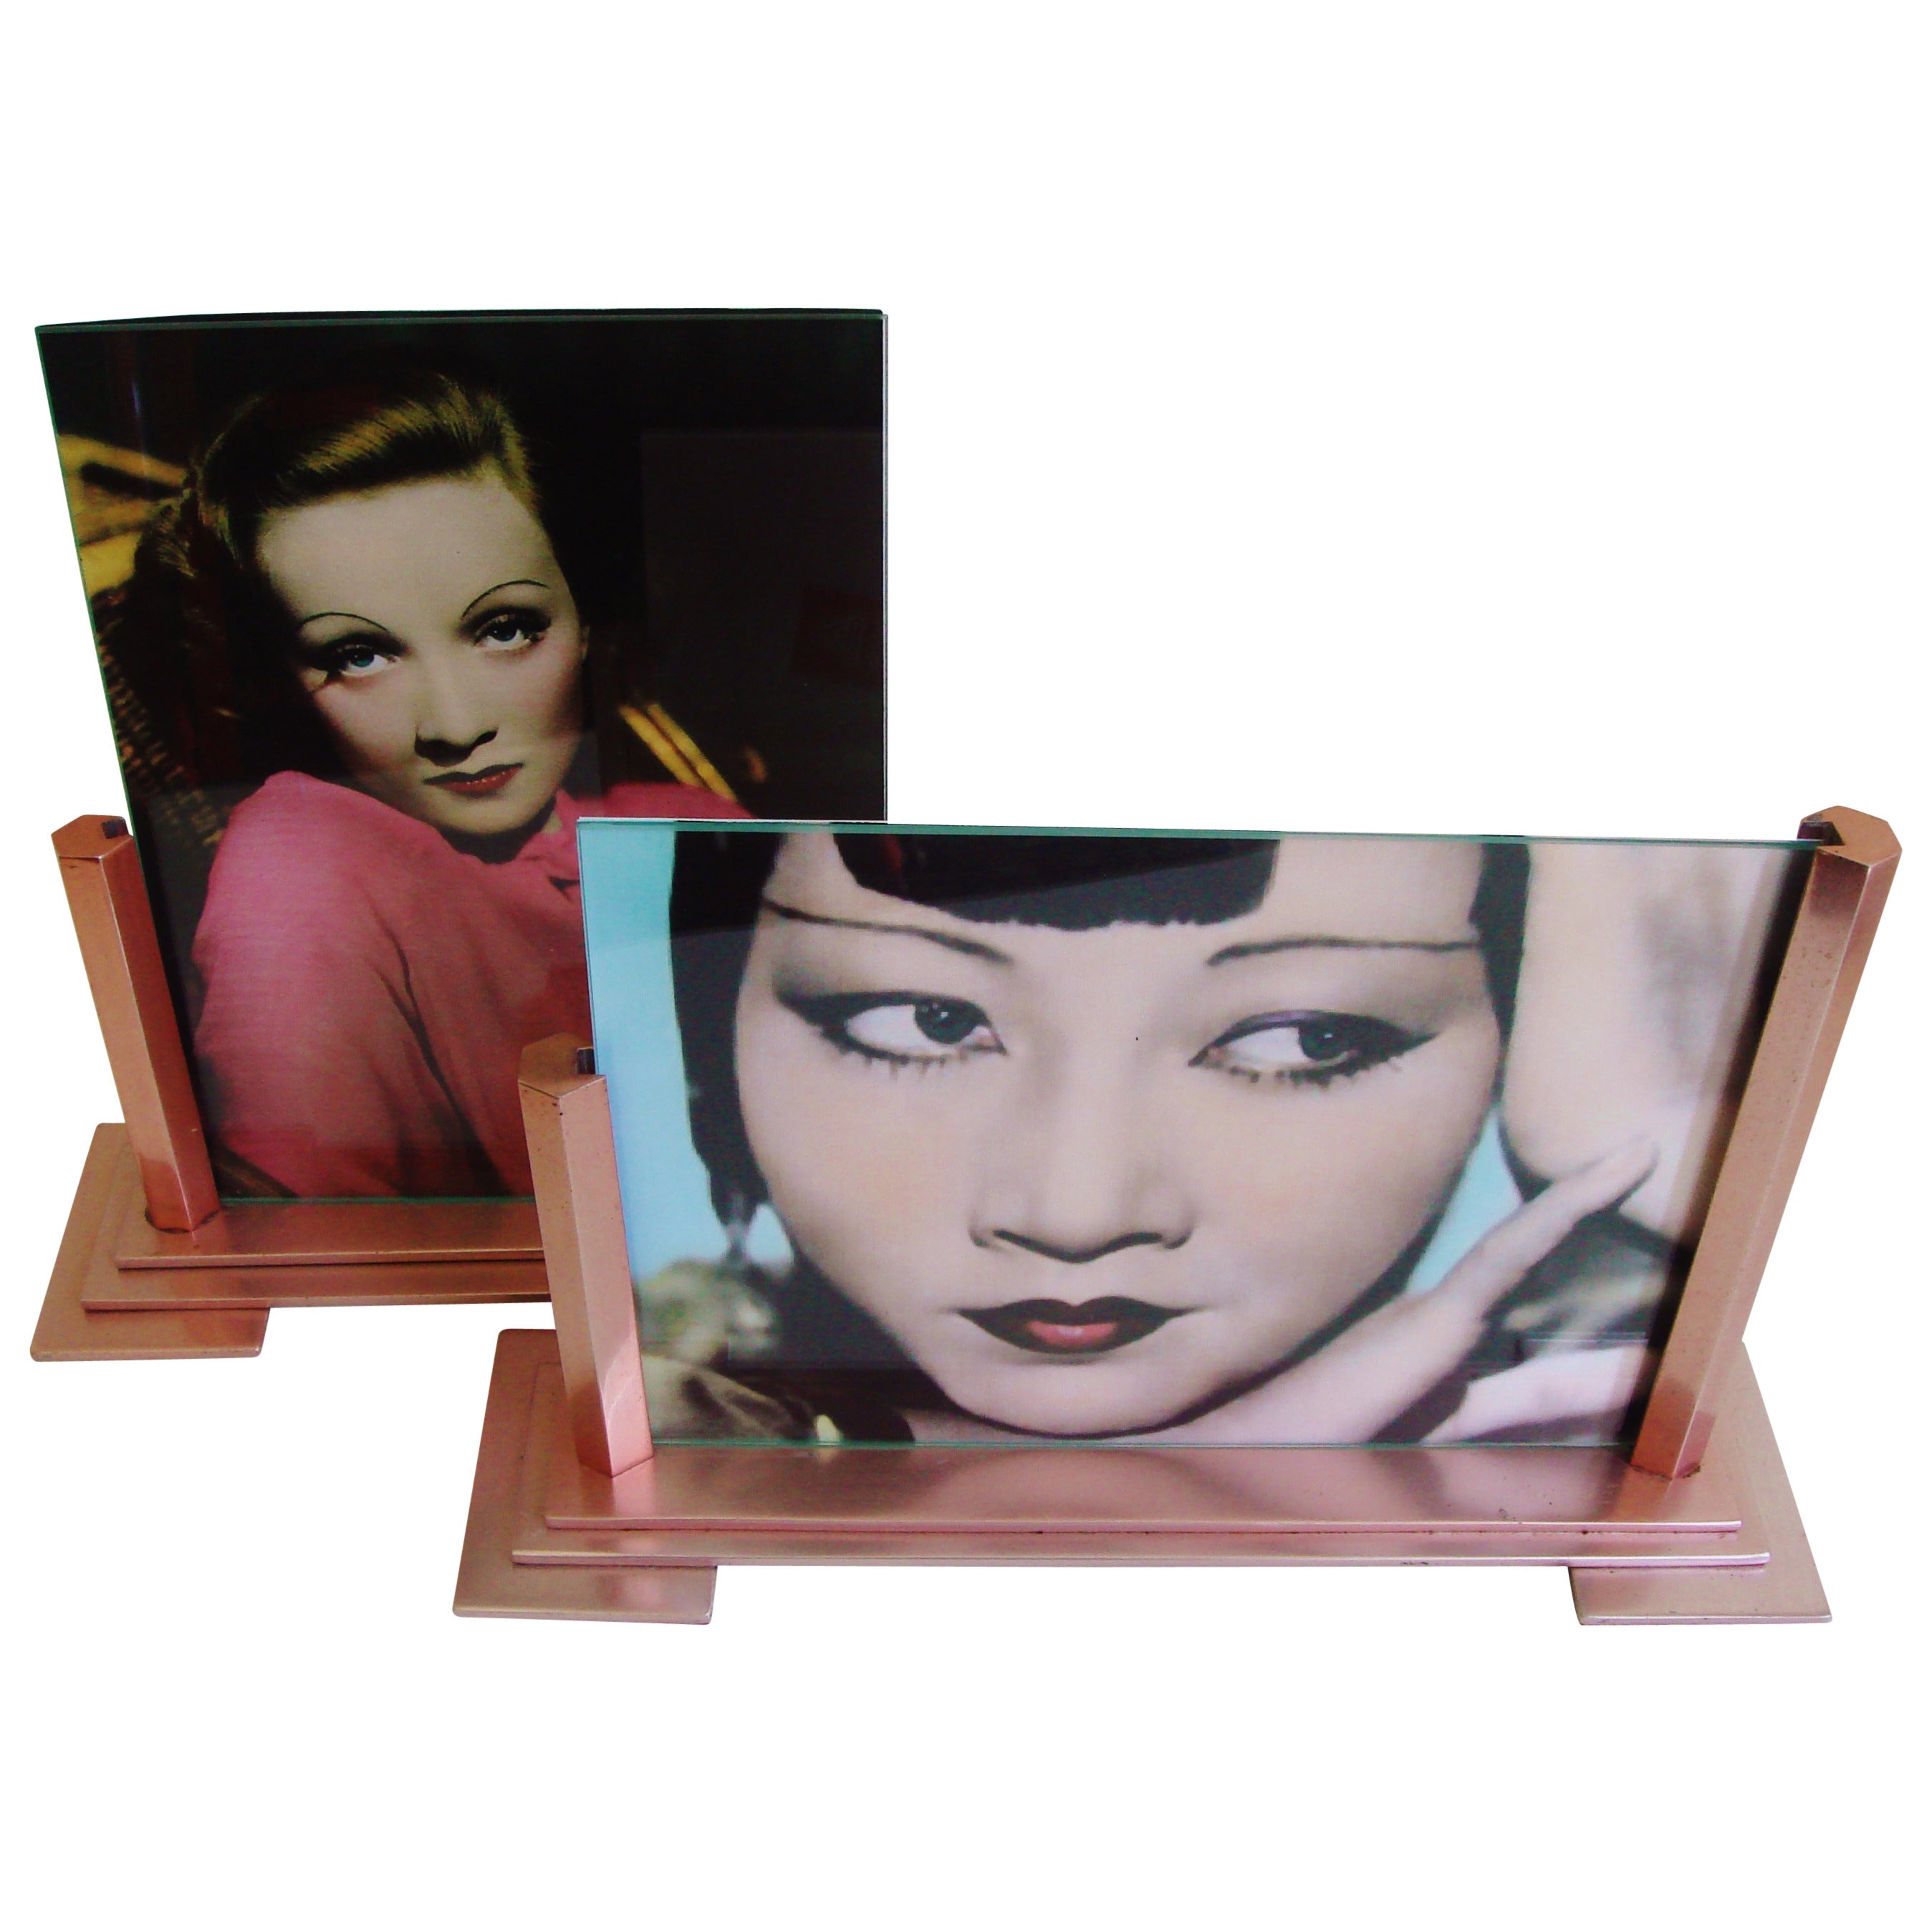 Pair of English Art Deco Rose Pink Anodized "Odeon" Photo Frames by Woodmet.